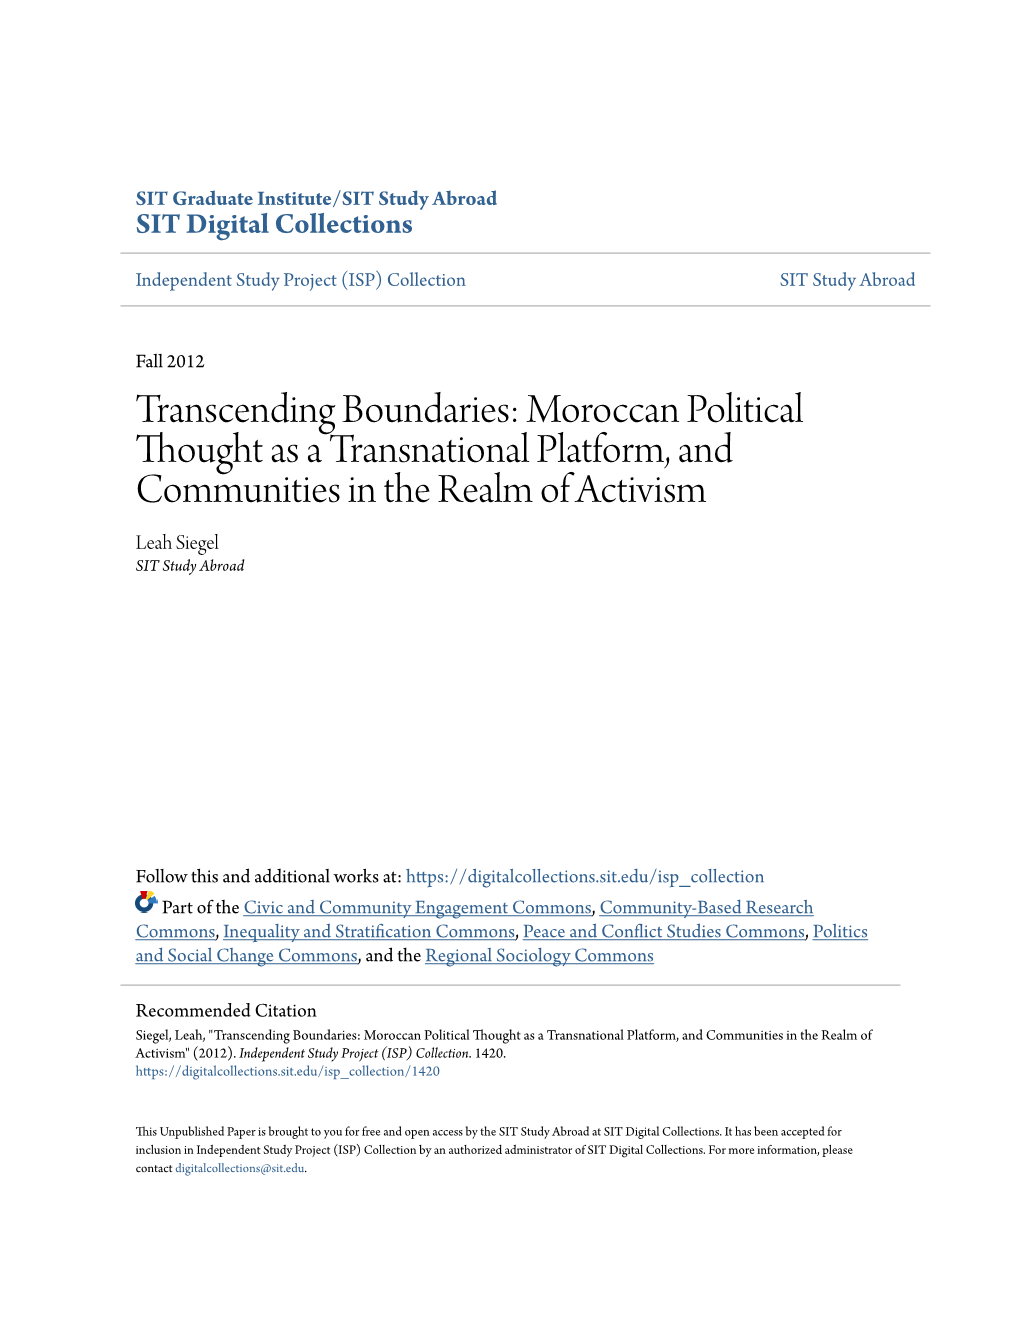 Moroccan Political Thought As a Transnational Platform, and Communities in the Realm of Activism Leah Siegel SIT Study Abroad